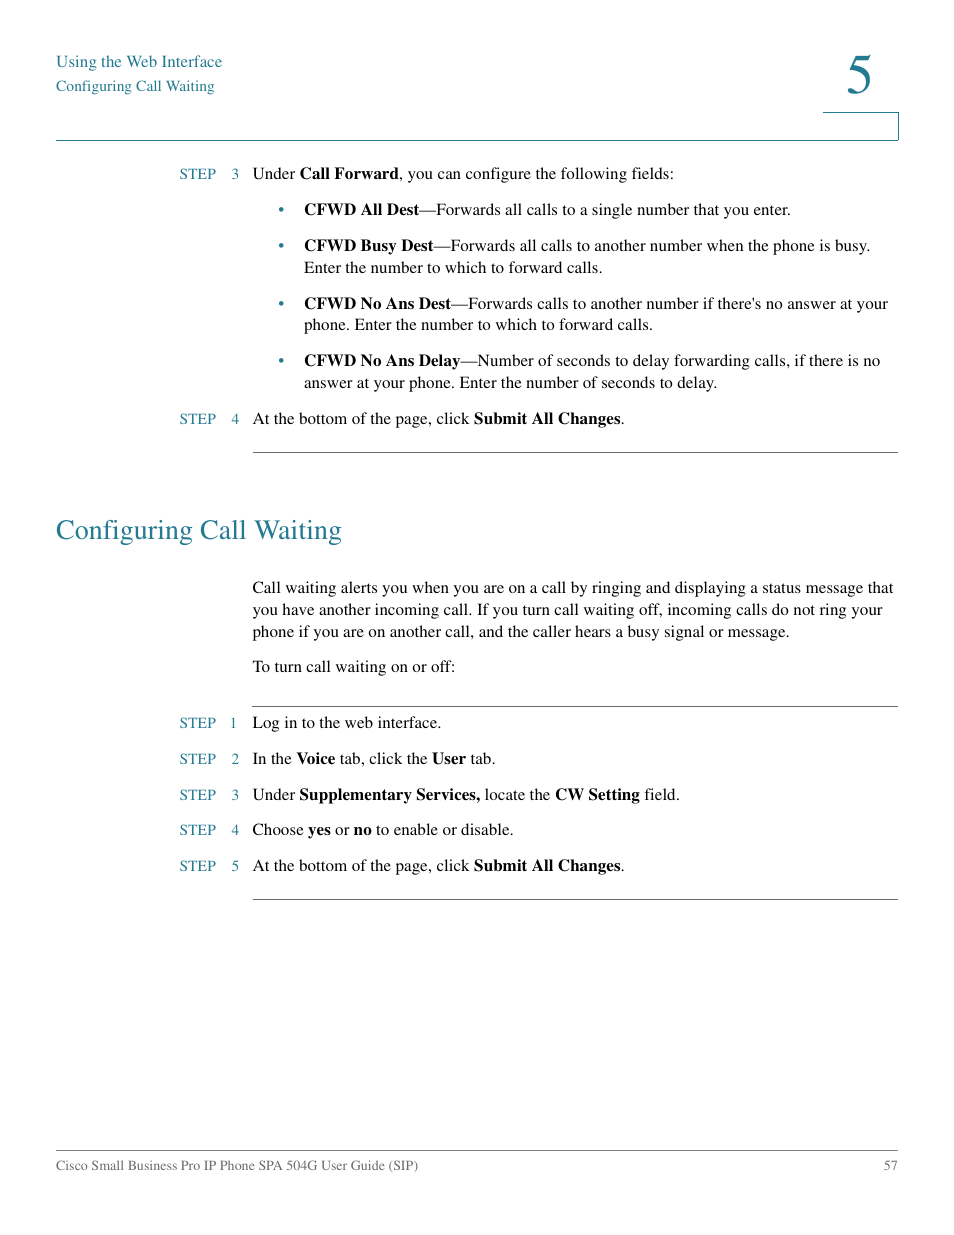 Configuring call waiting | Cisco IP Phone SPA 504G User Manual | Page